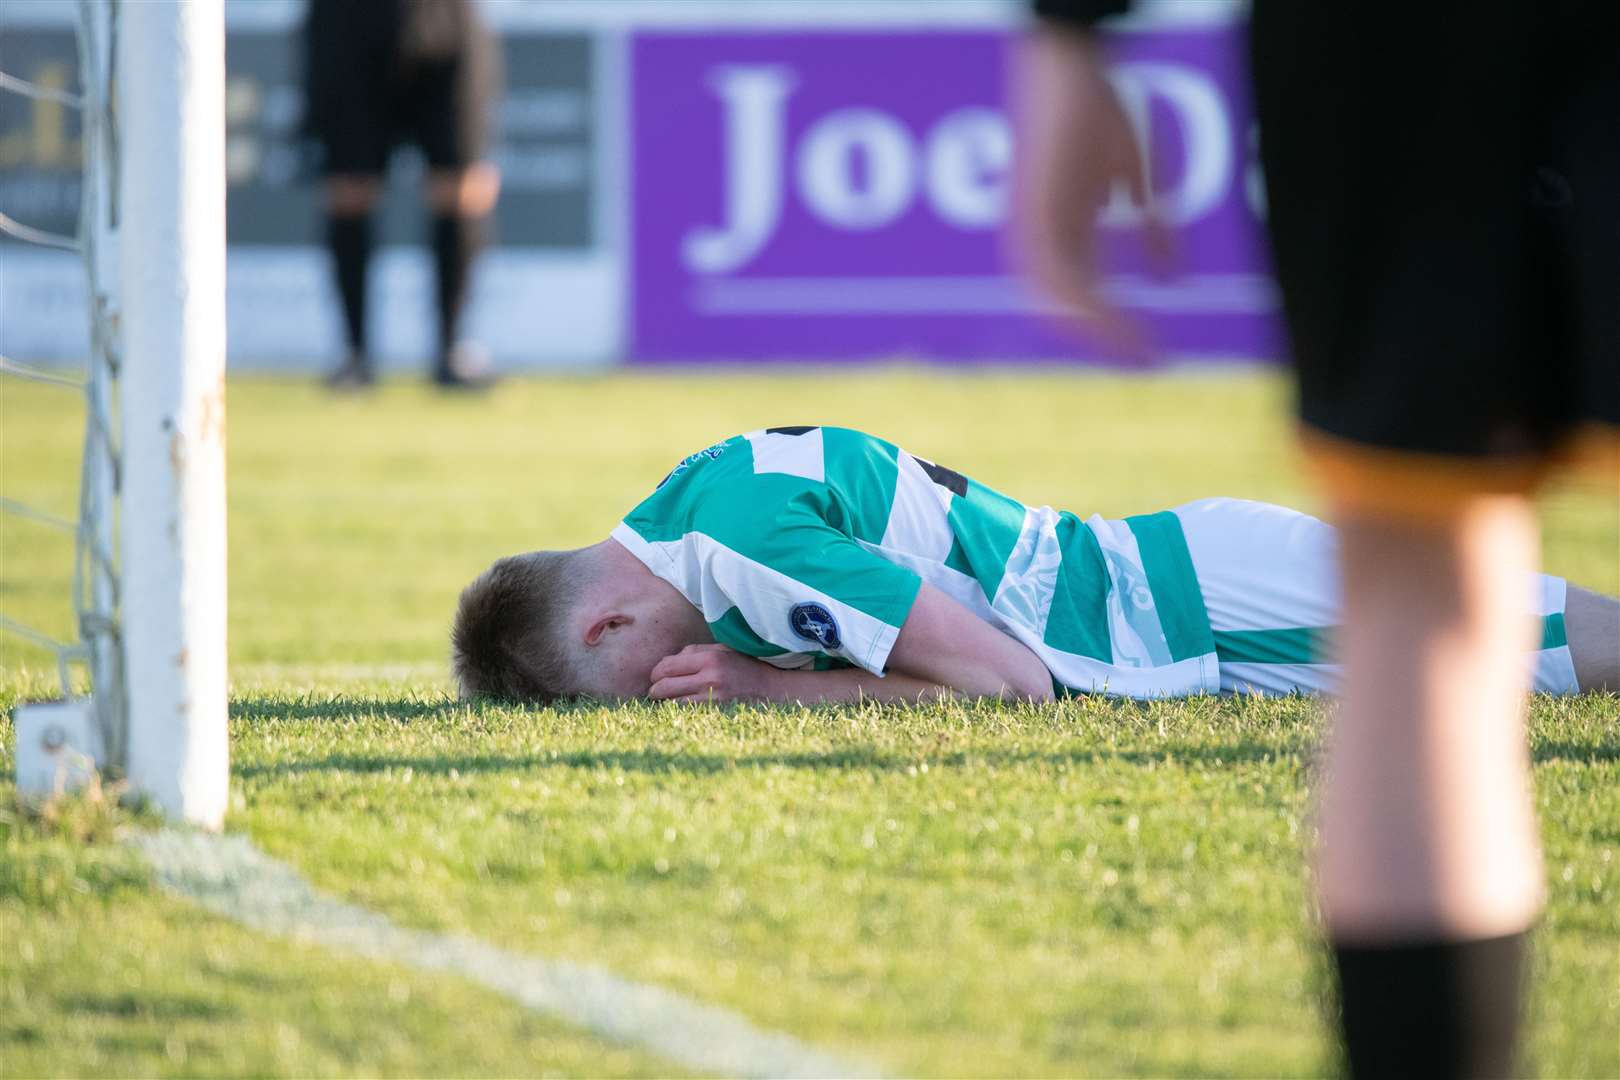 Buckie's Lyall Keir after he missed a chance. ..Buckie Thistle FC (2) vs Clachnacuddin FC (3) - Highland Football League 23/24 - Victoria Park, Buckie 24/02/2024...Picture: Daniel Forsyth..